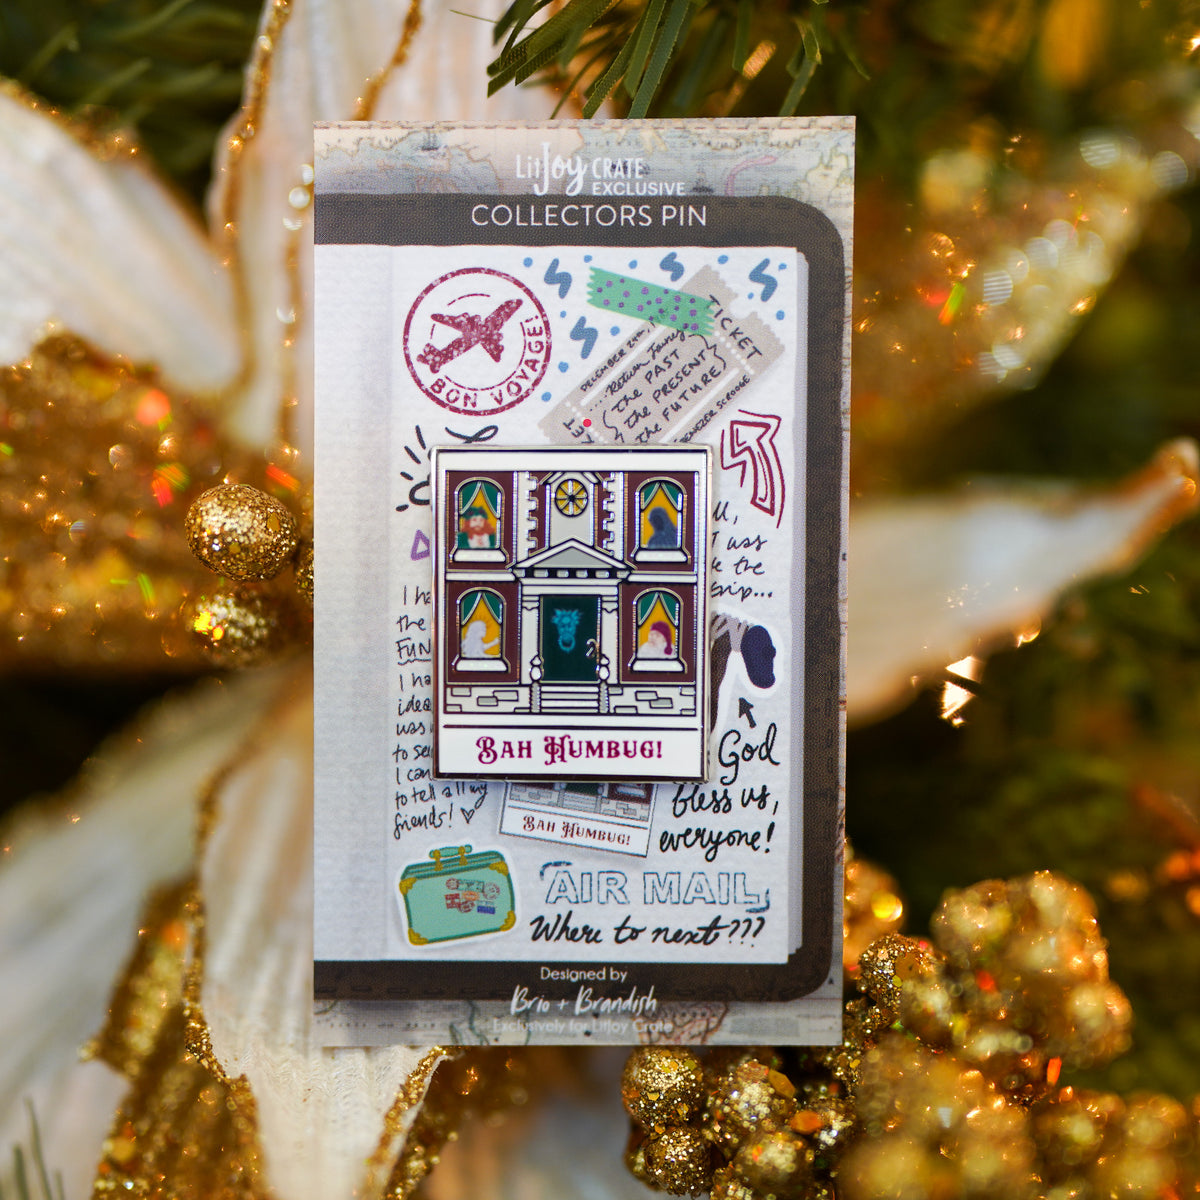 A Christmas Carol Polaroid Enamel Pin featuring the ghosts of Christmas Past, Present, Future, and Scrooge&#39;s business partner Marley in the windows.  